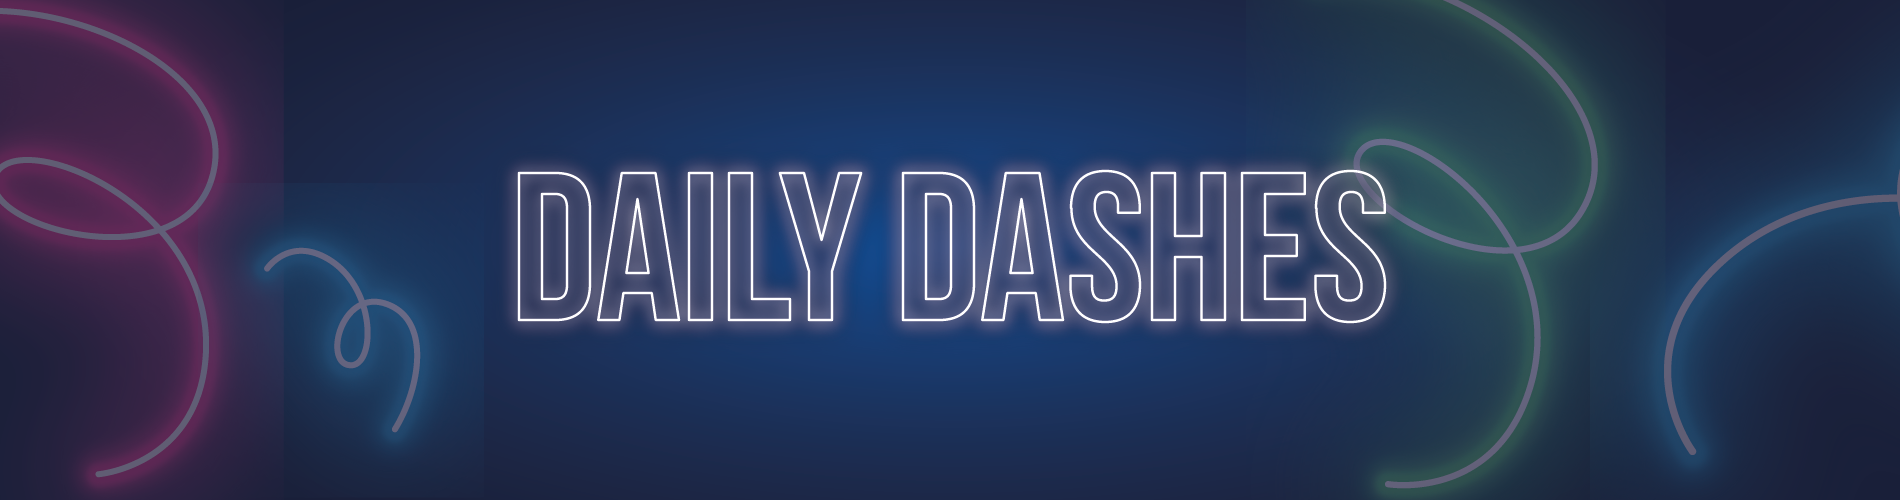 Daily Dashes - web banner.png